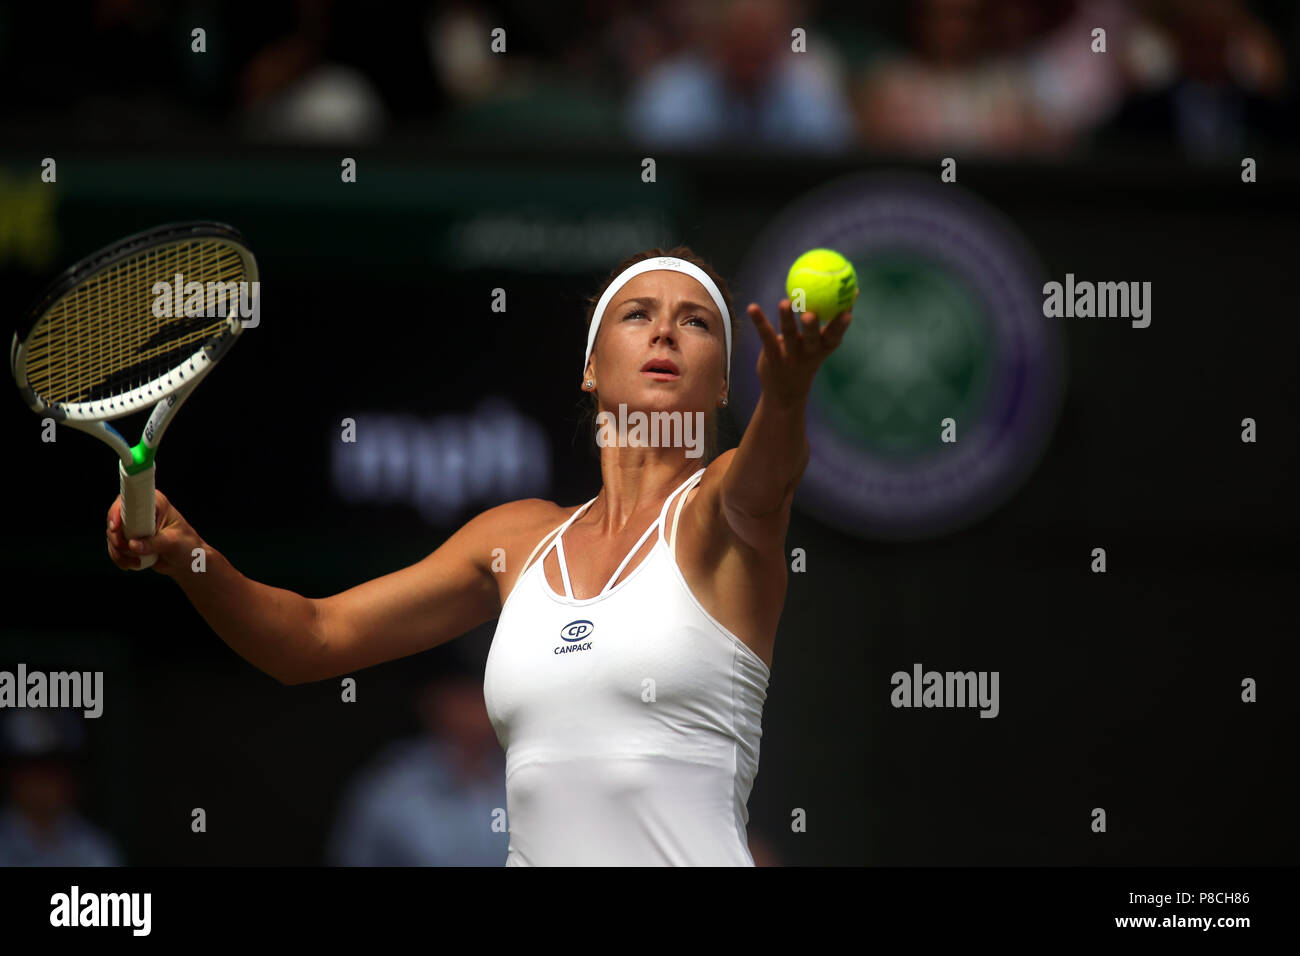 London, England - July 10, 2018. Wimbledon Tennis: Italy's Camila Georgi in  action during her quarter-final match against Serena Williams on Centre  Court at Wimbledon today. Williams won the match to advance